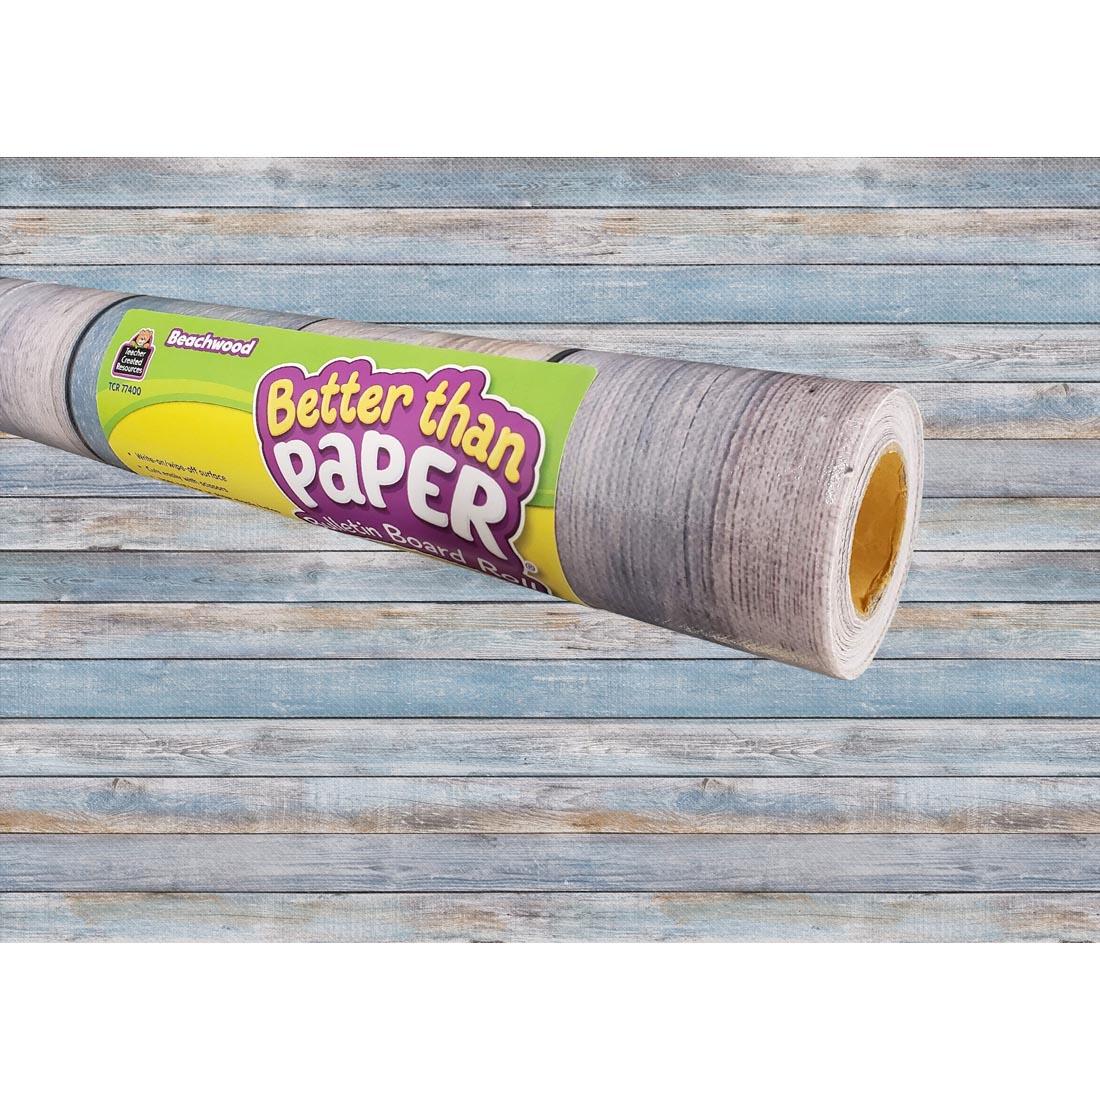 Beachwood Better Than Paper Bulletin Board Roll with it shown in use in the background